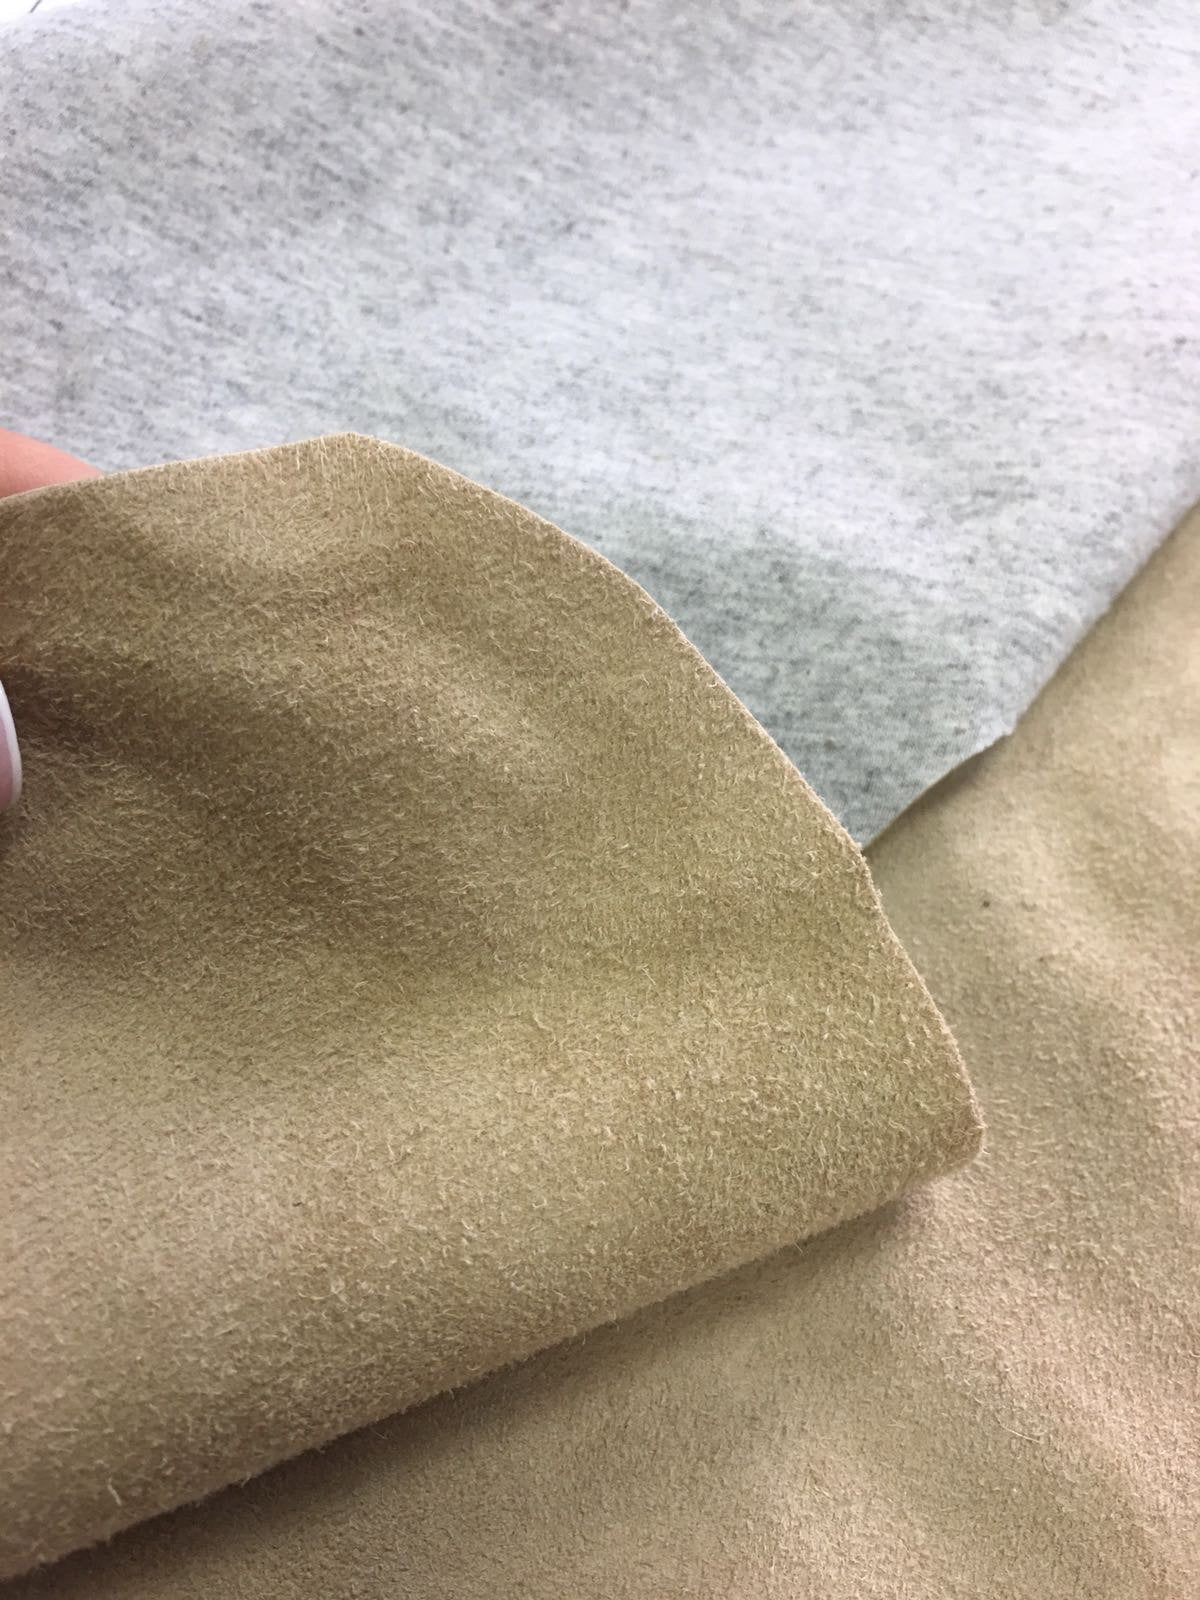 Beige/Brown Suede Stretch Fabric Lambskin 0.9mm/2.25oz / CANDIED GINGER 677